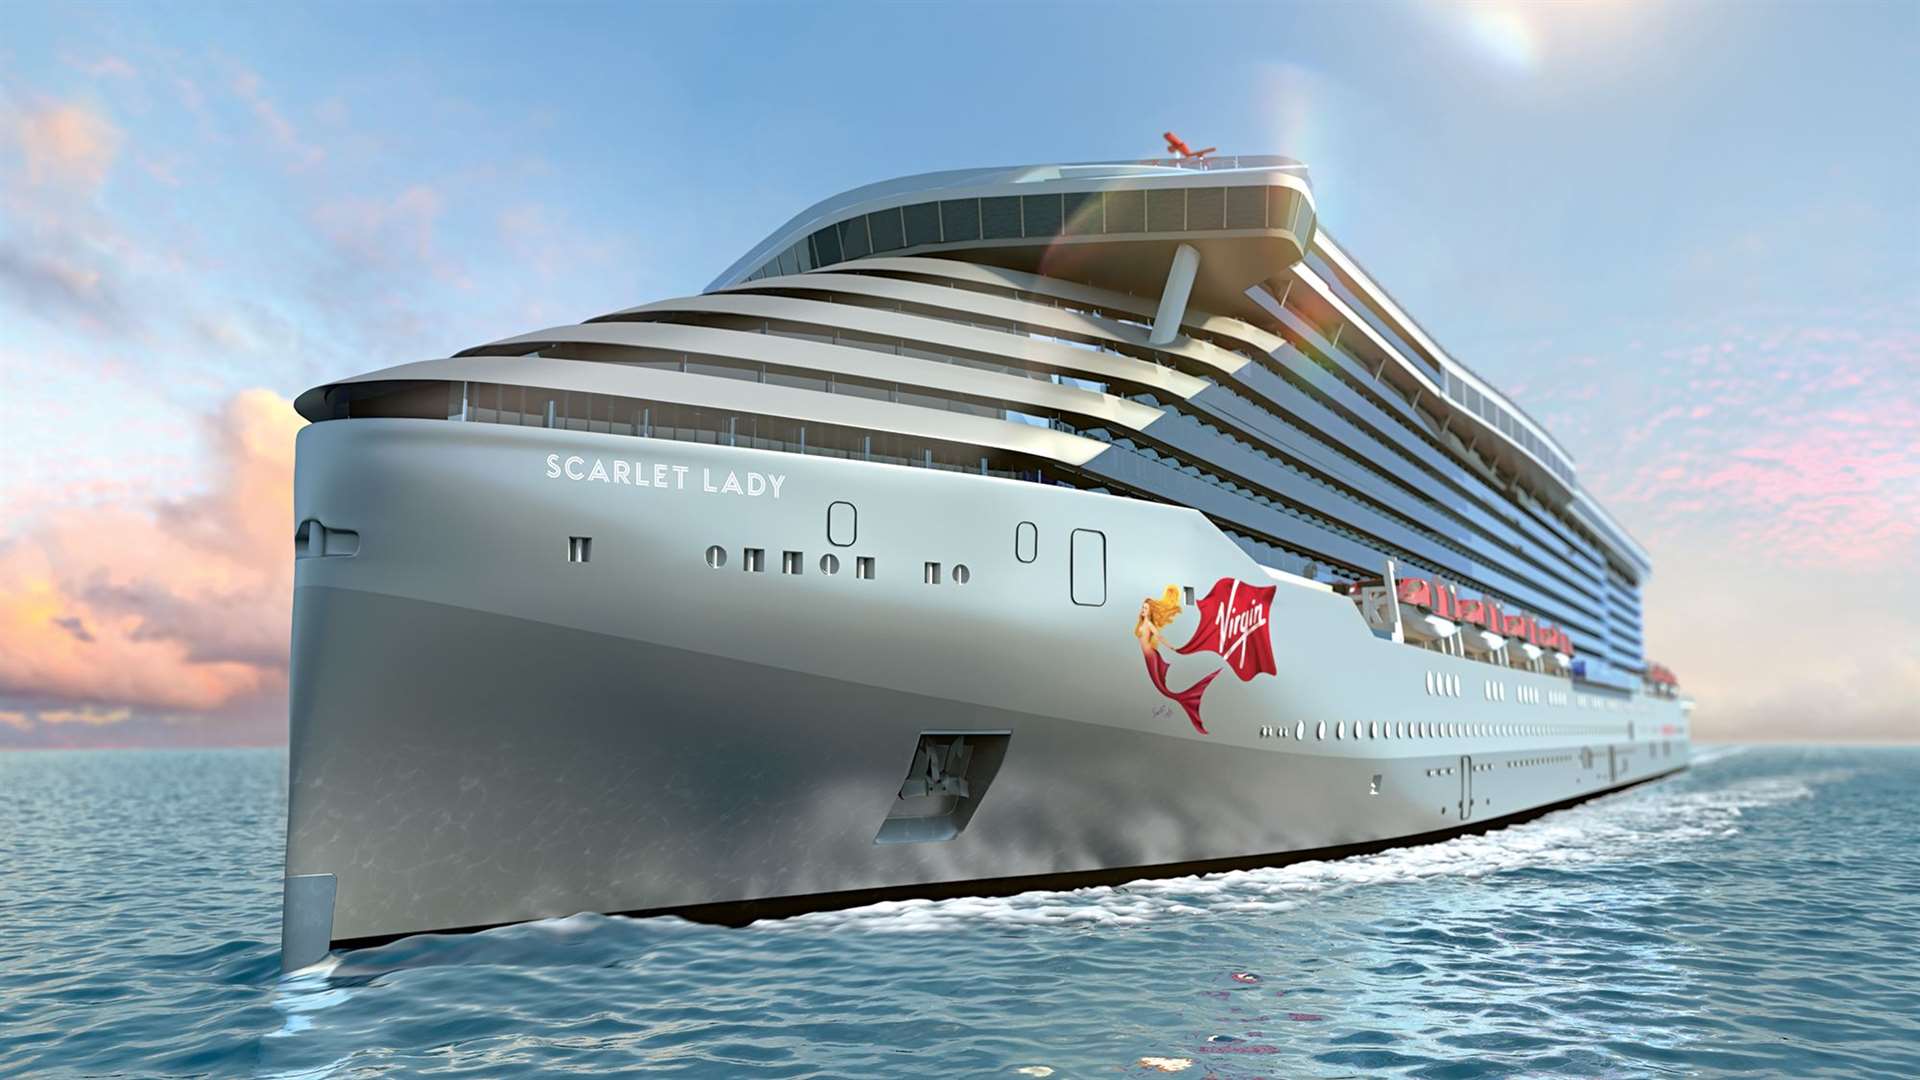 Virgin Voyages' Scarlet Lady will stop off at The Port of Dover's Dover Cruise Terminal in February 2020. Picture Virgin Voyages